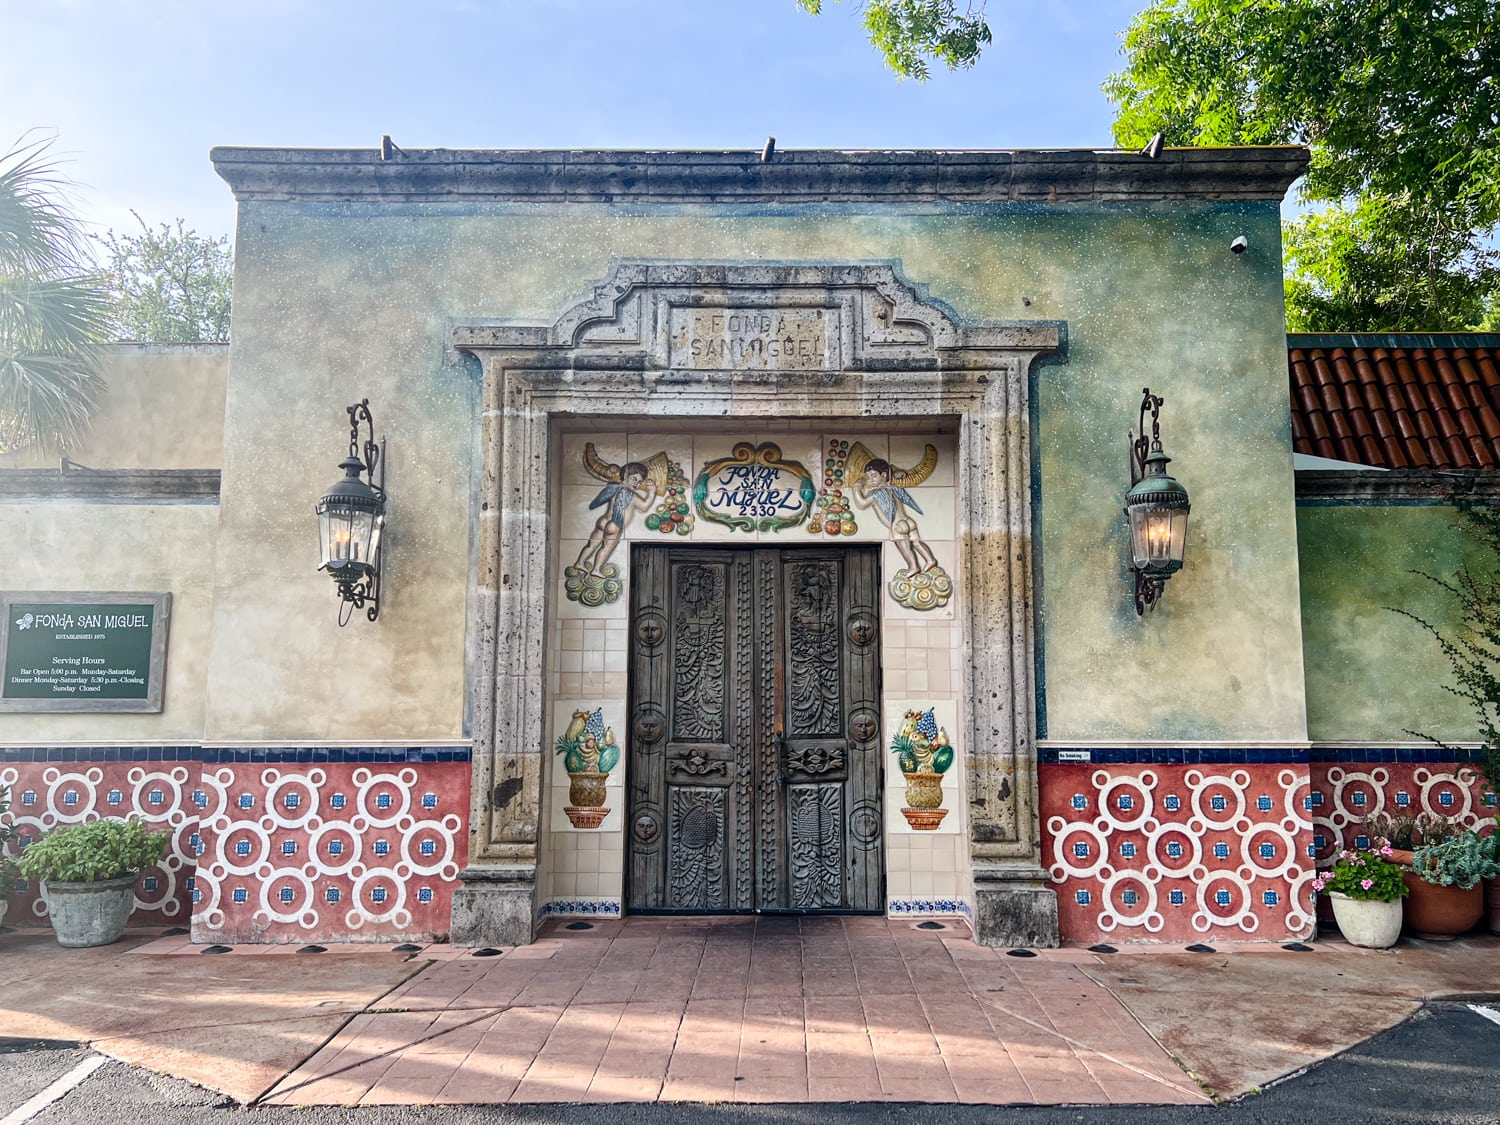 Fonda San Miguel, one of the best Mexican restaurants in Austin, TX